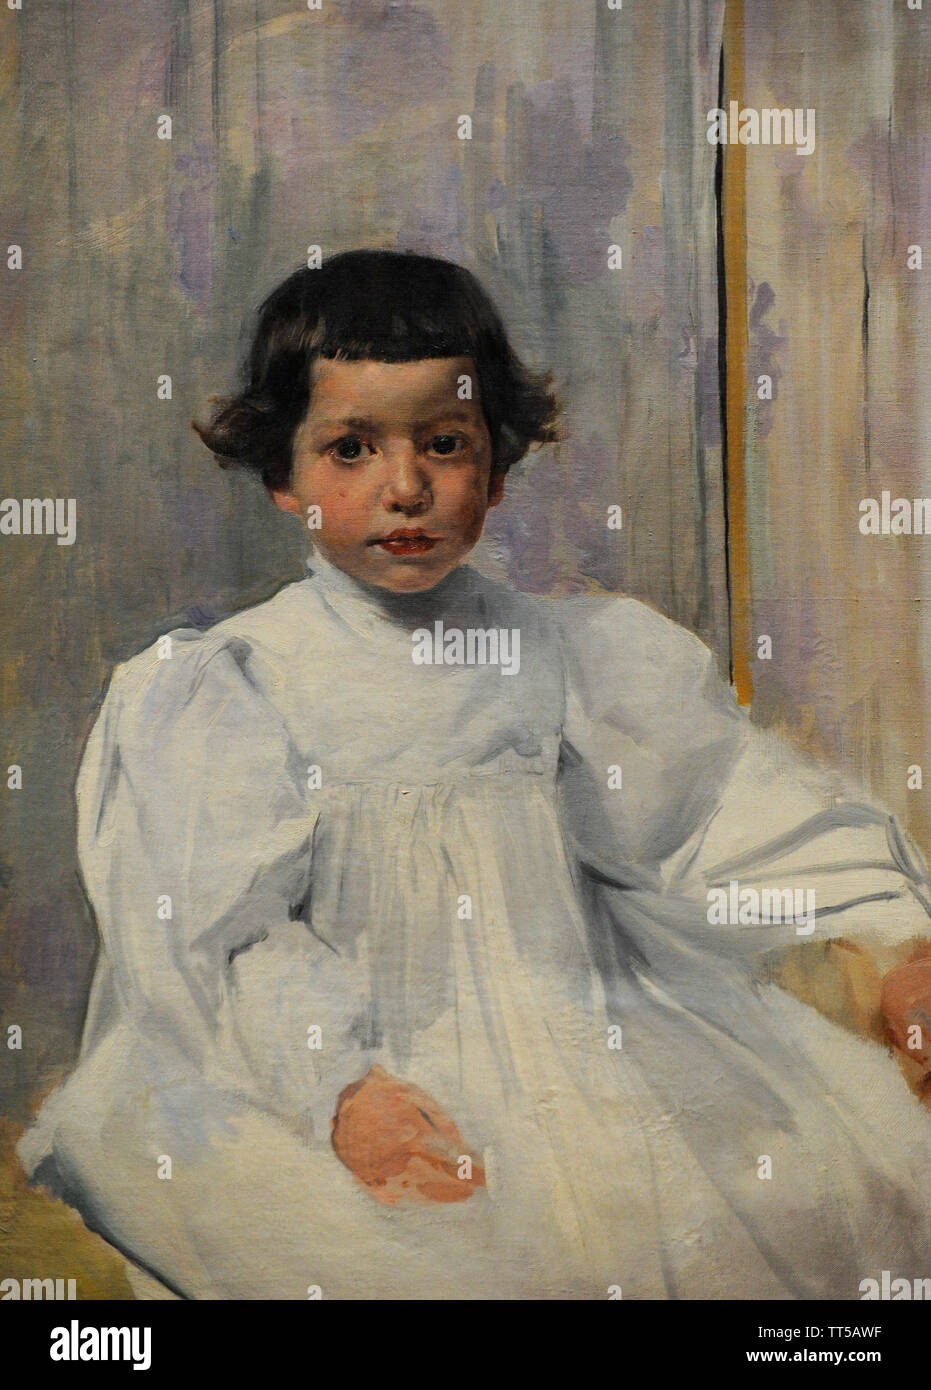 Joaquin Sorolla y Bastida (1863-1923). Spanish painter. Joaquin dressed in white, 1896. At four years old, Joaquin posing for his father sitting on a chair. Oil on canvas, 85 x 65 cm. Sorolla Museum. Madrid. Spain. Stock Photo